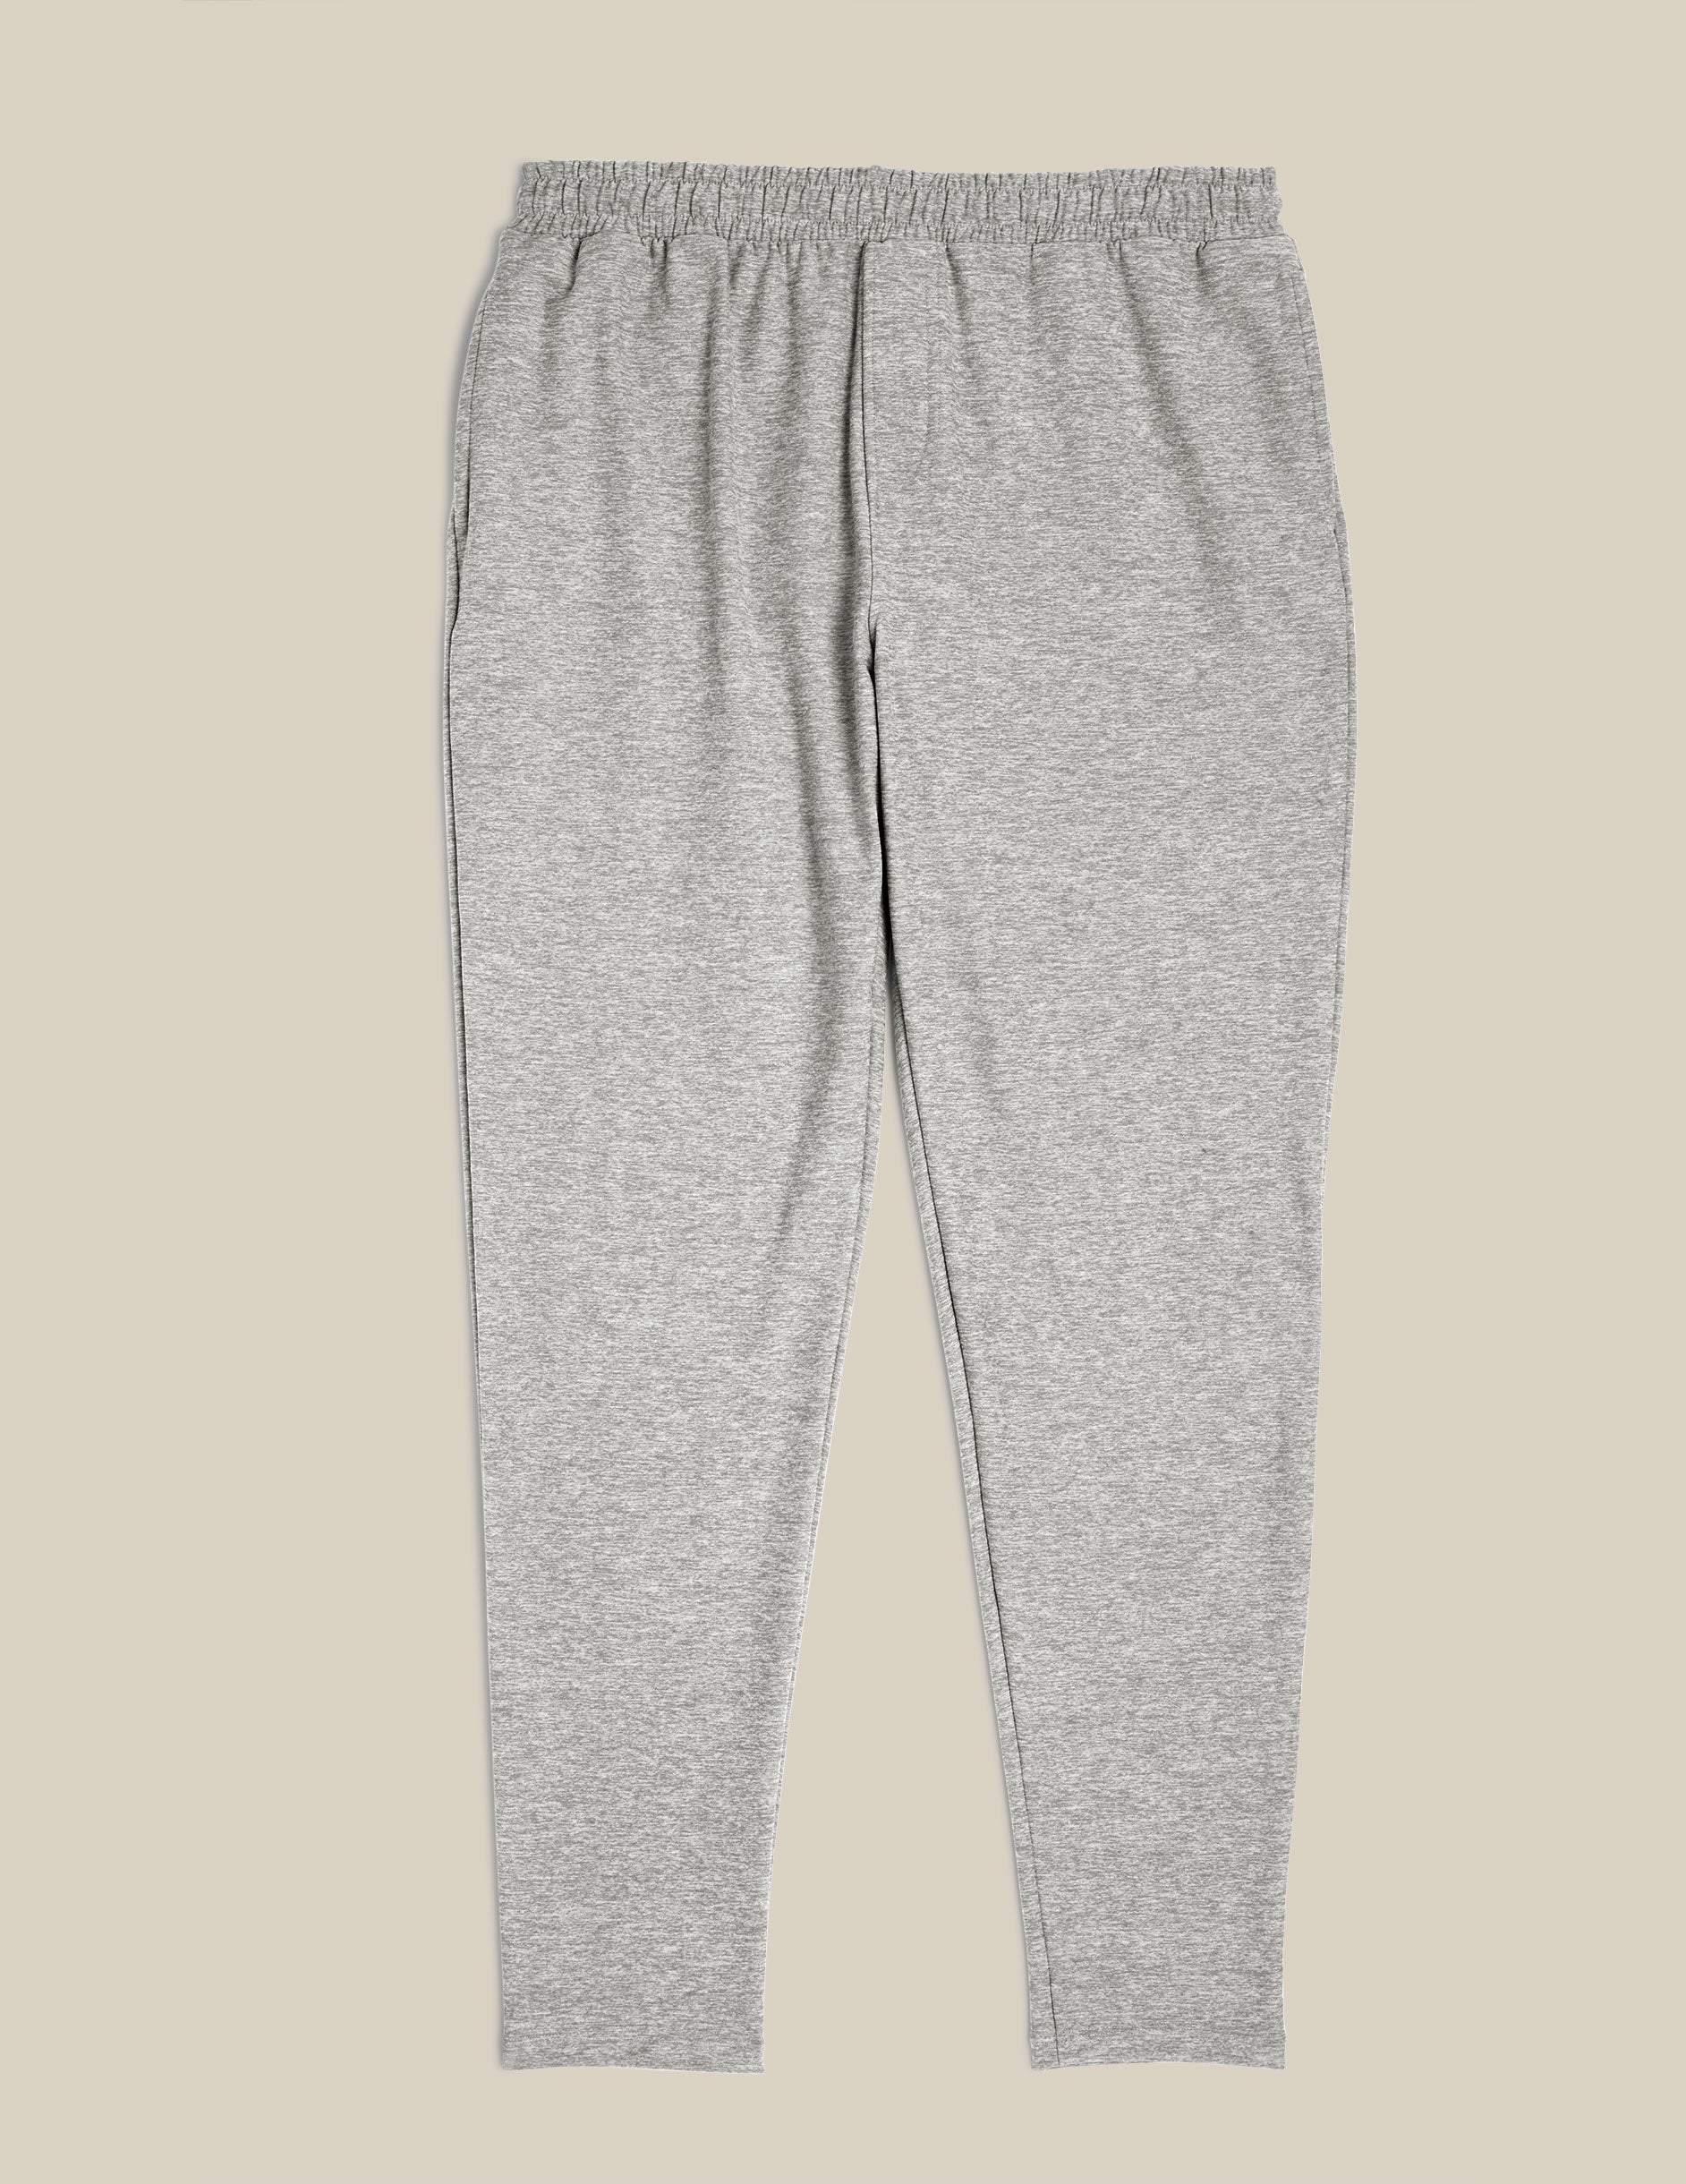 gray men's athleisure pants with an internal drawcord and pockets.